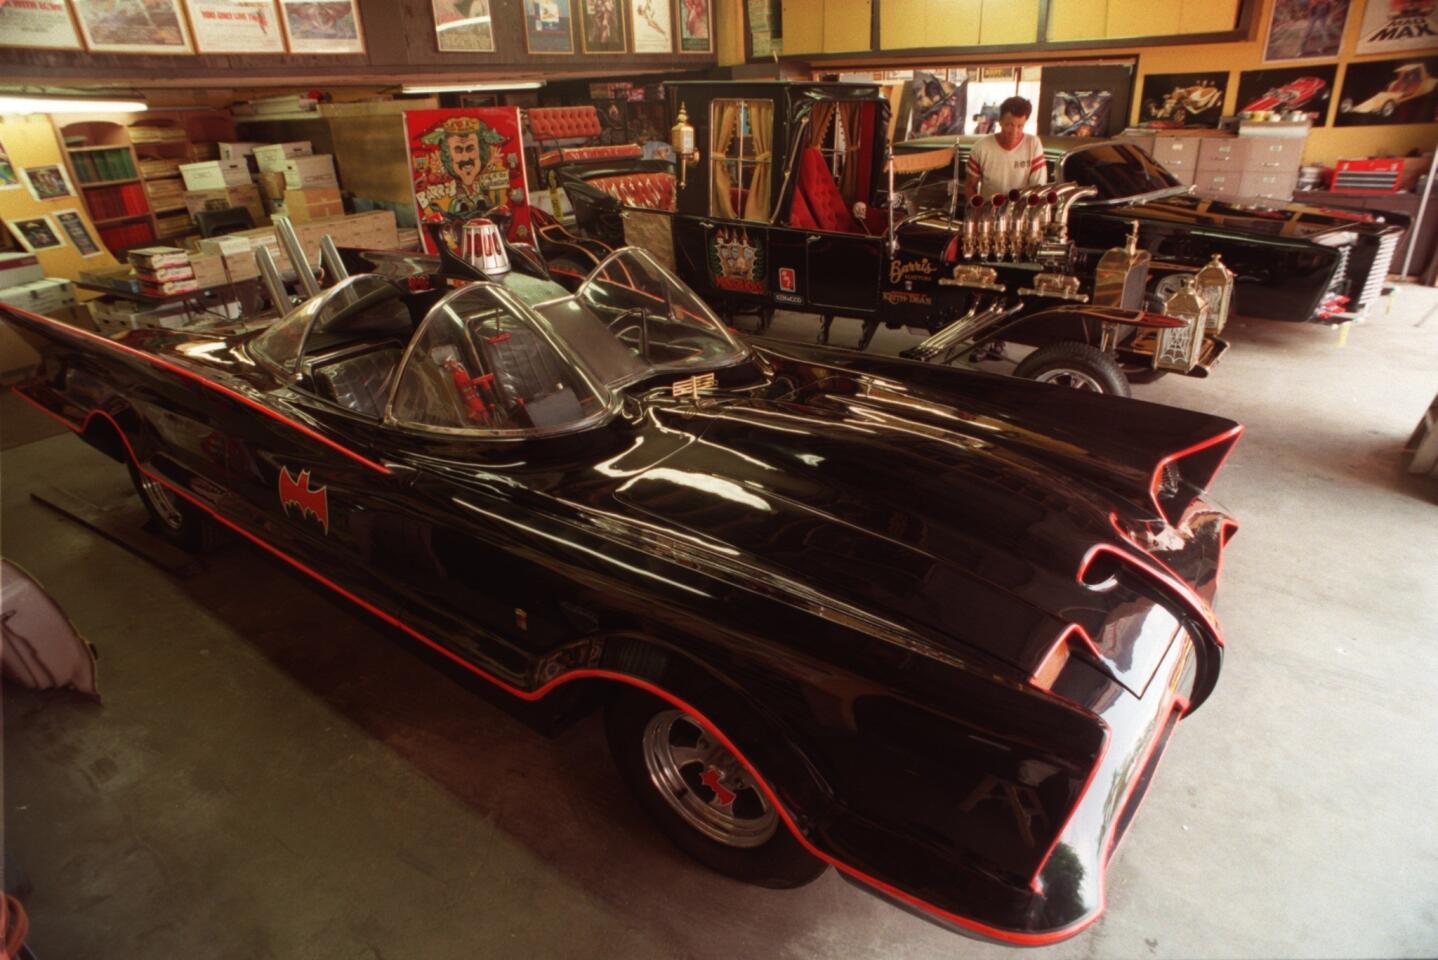 The Batmobile from the 1960s TV series.